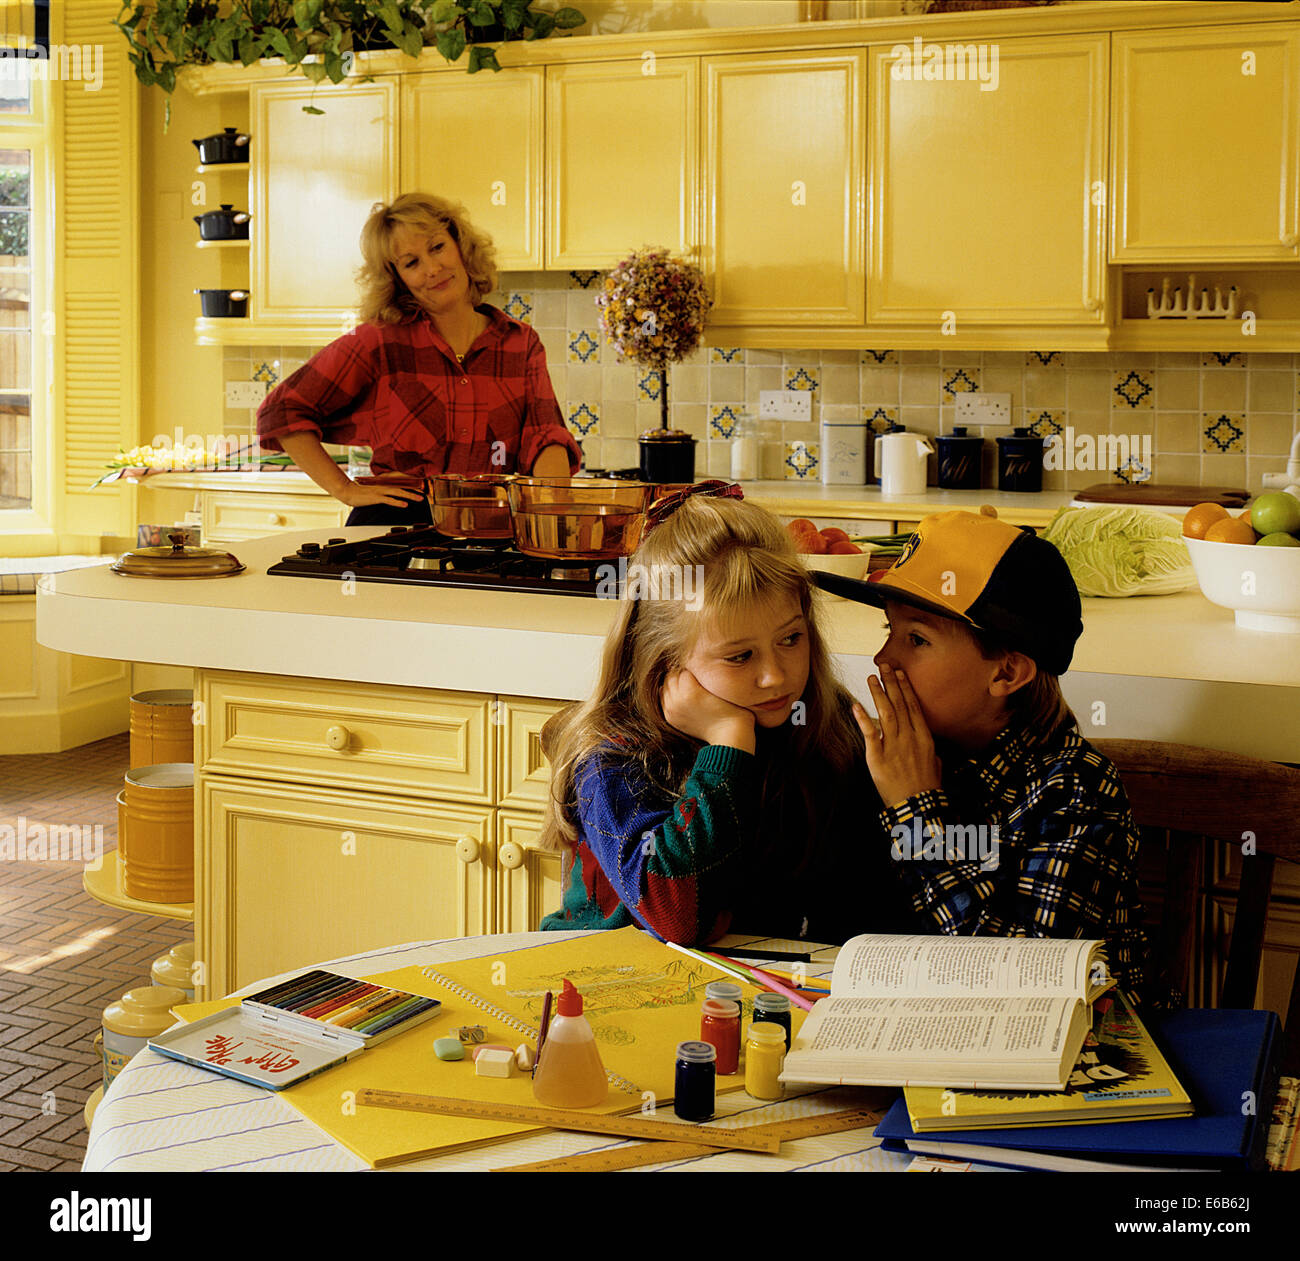 Young boy and girl sharing secret whilst mother looks suspiciously on, in modern home kitchen setting Stock Photo